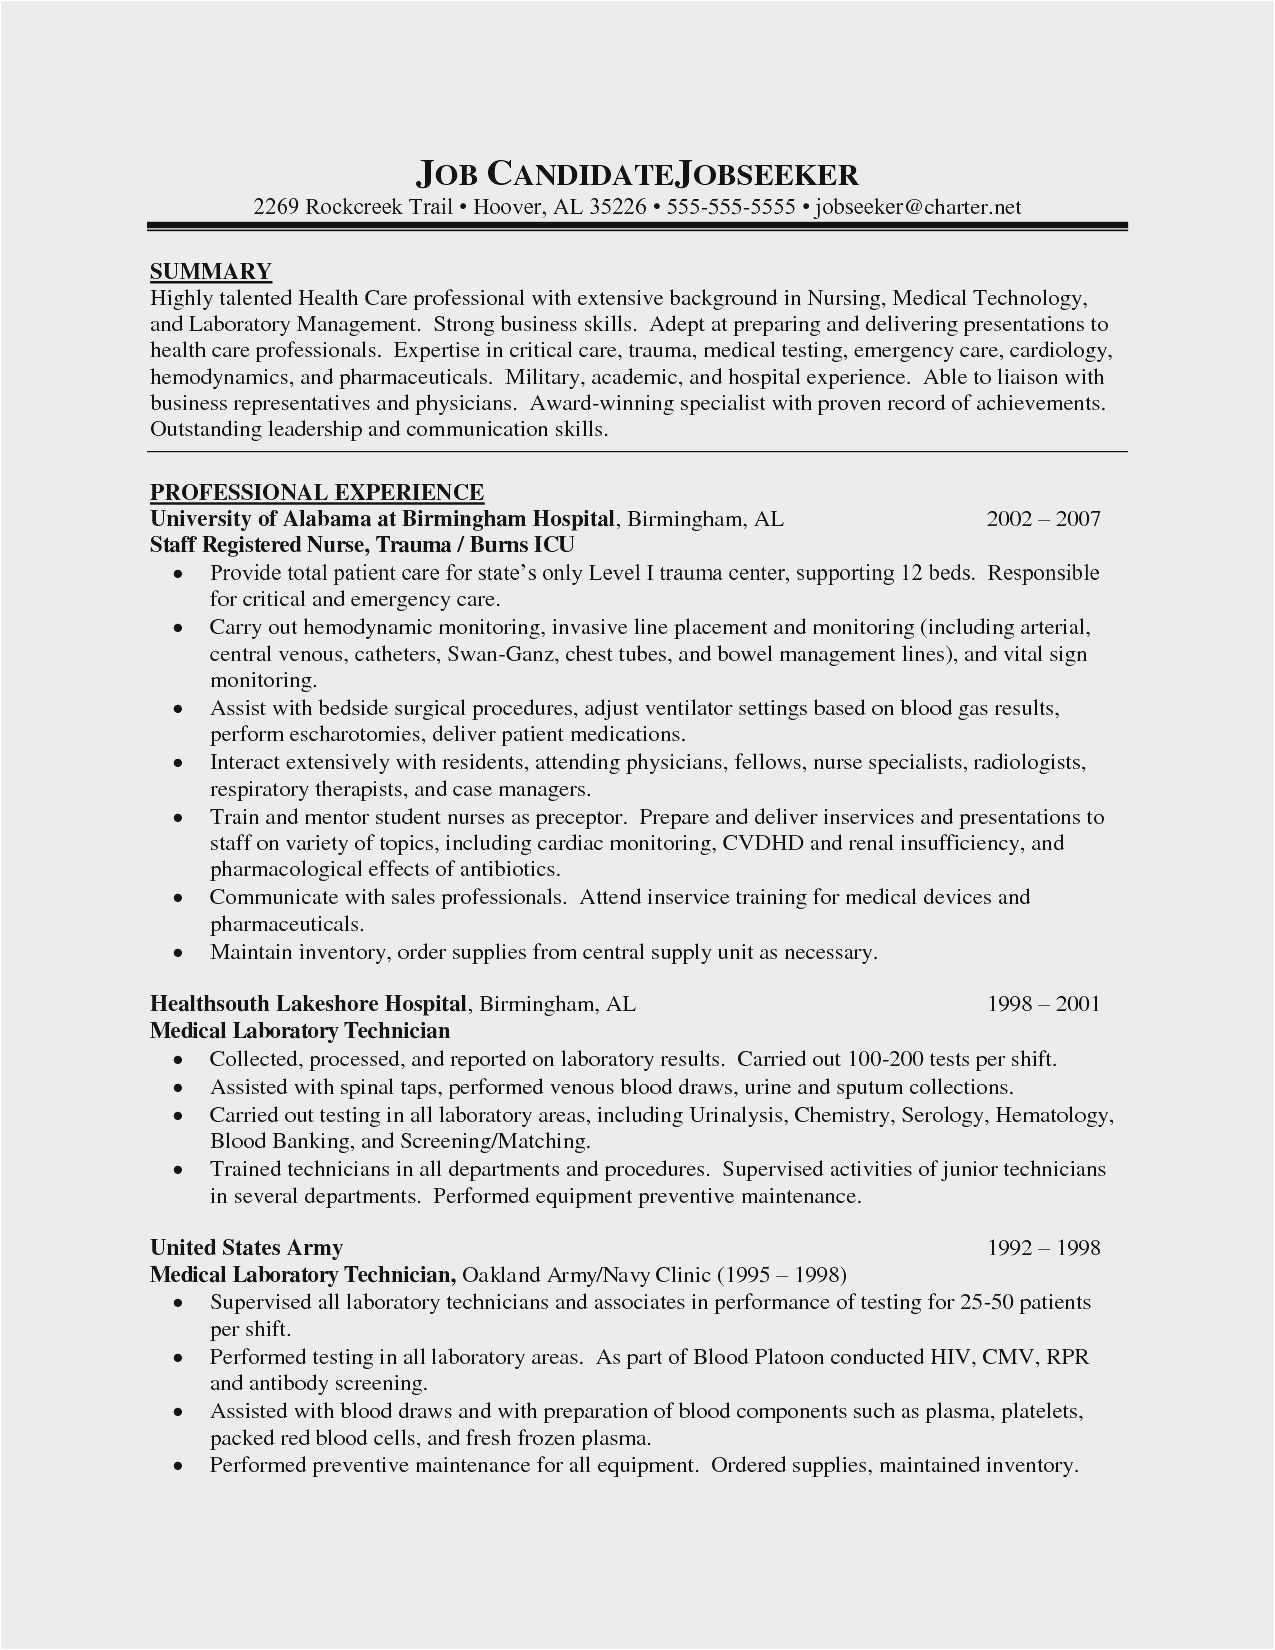 Resume Sample for Cna with No Experience Cna Resume Examples with No Experience Free Collection 52